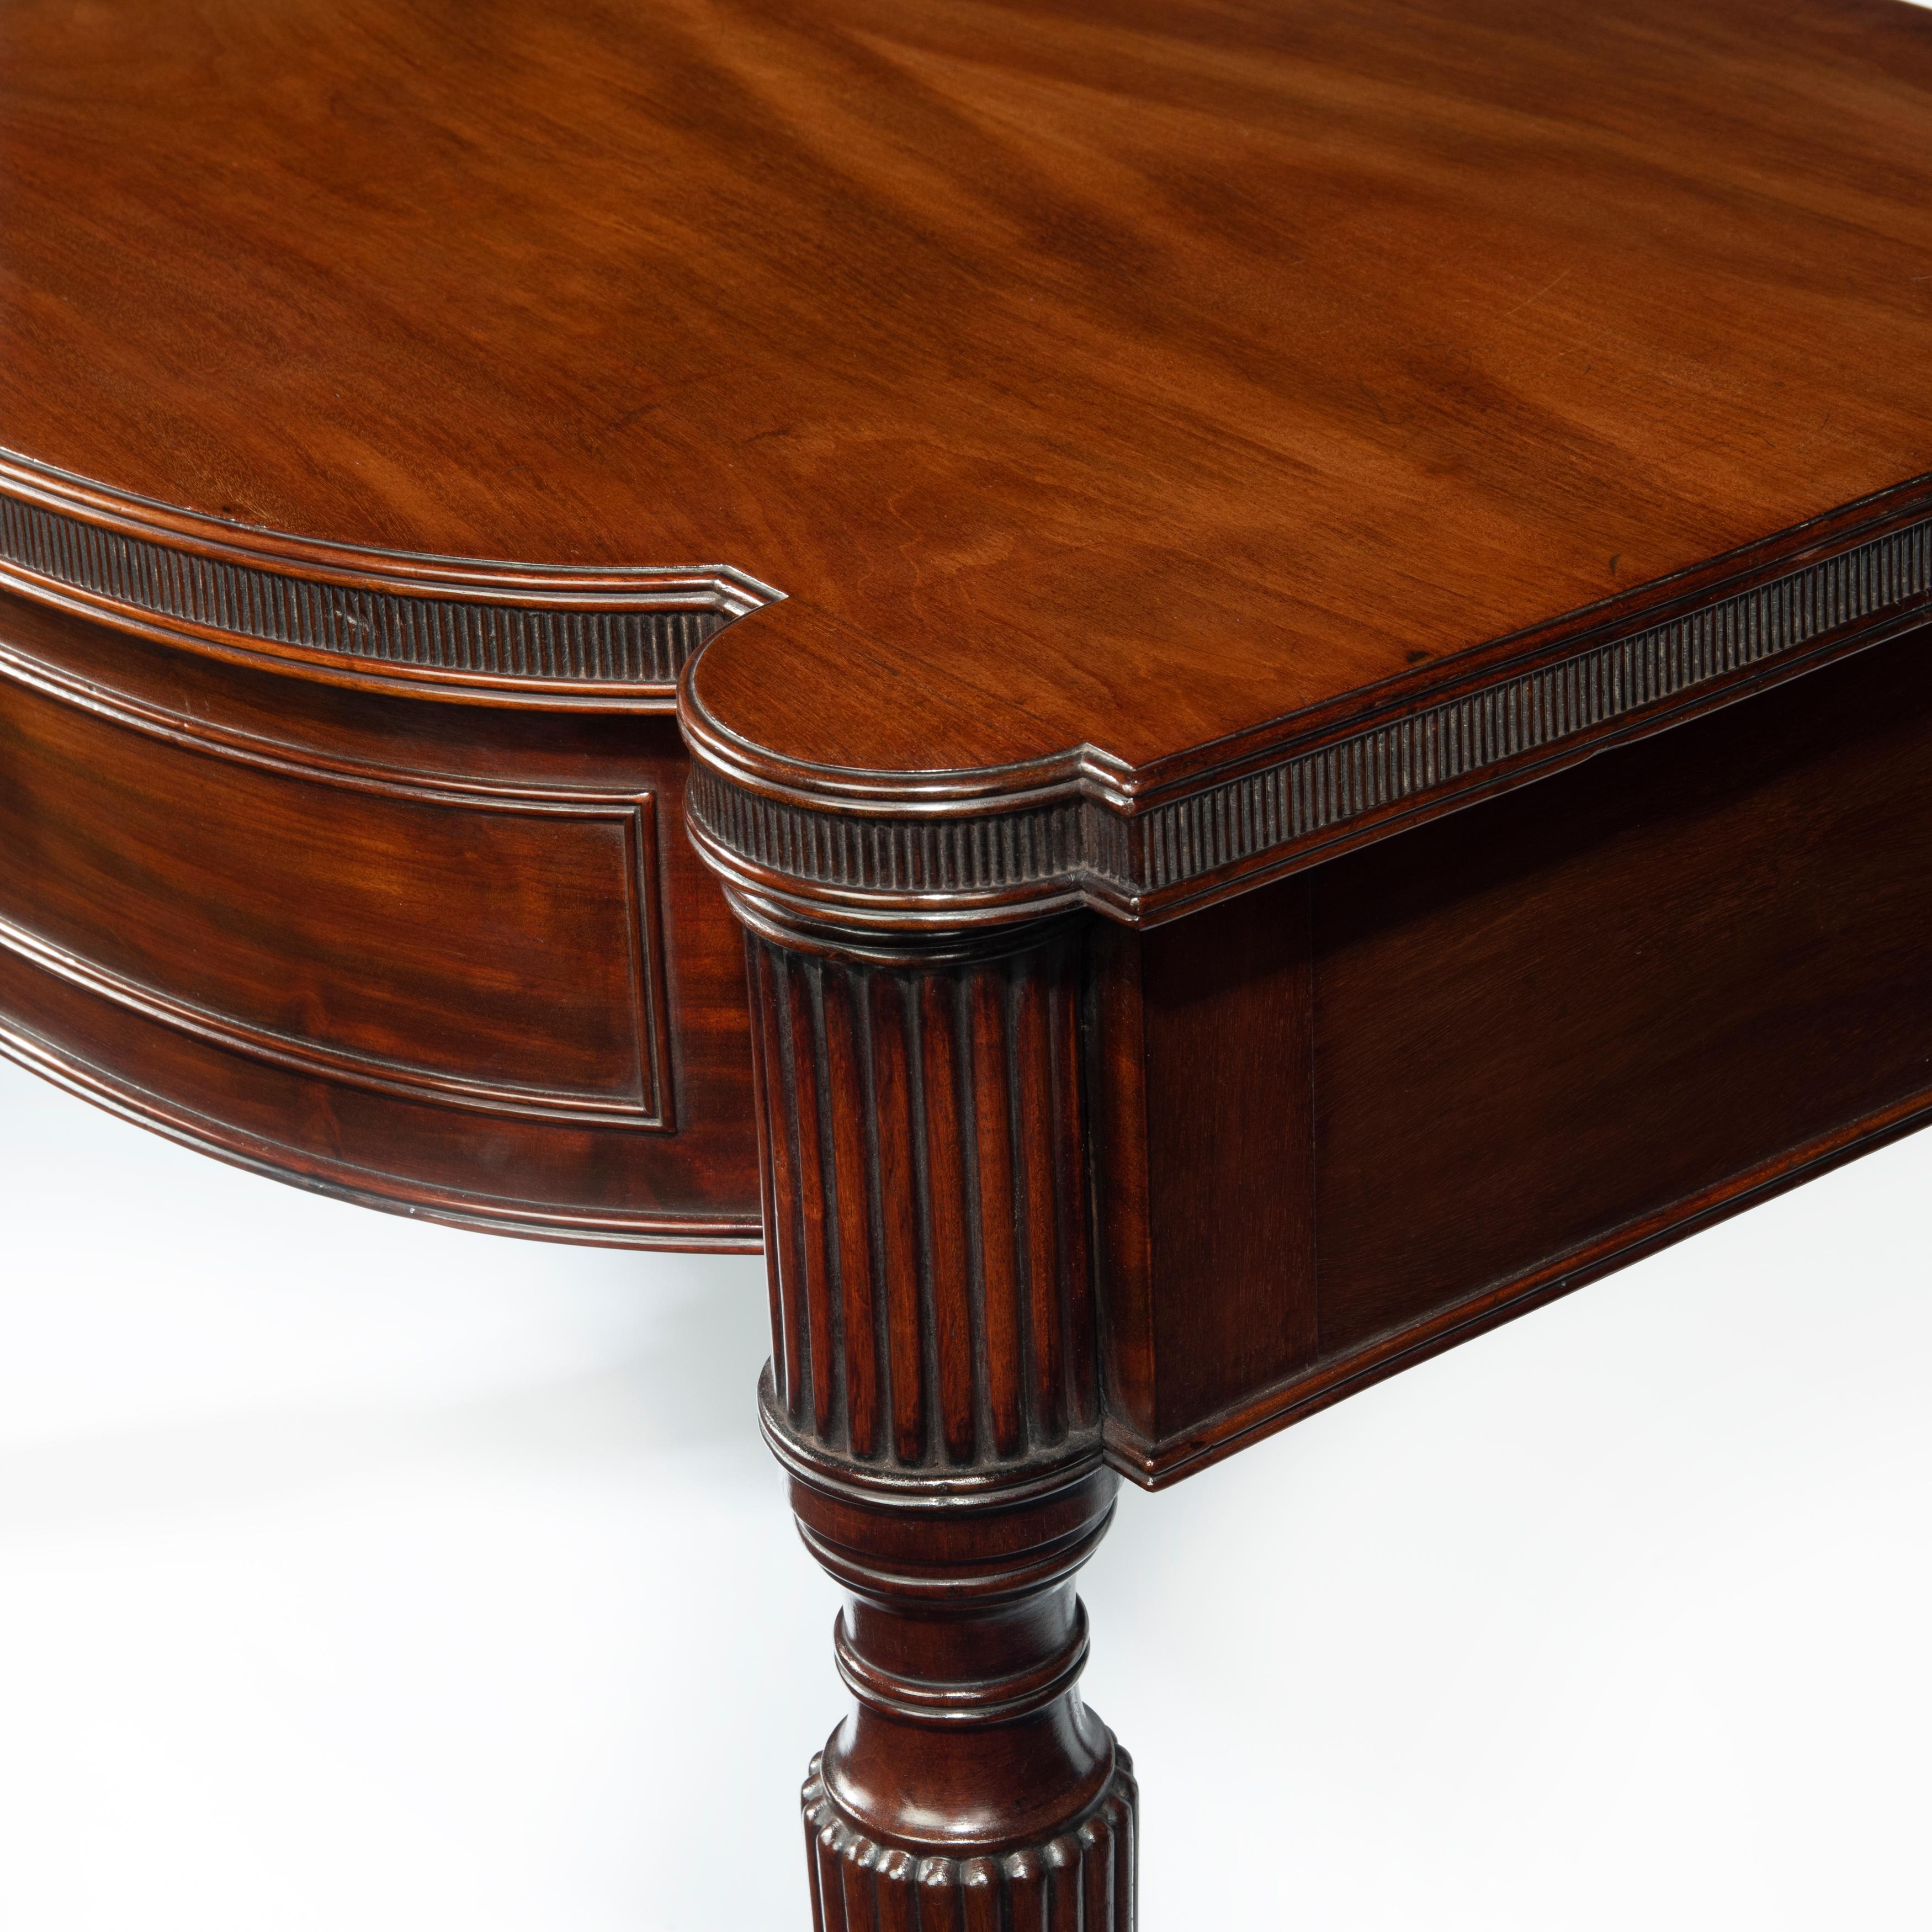 Regency Mahogany Serving Table Attributed to Gillows 1